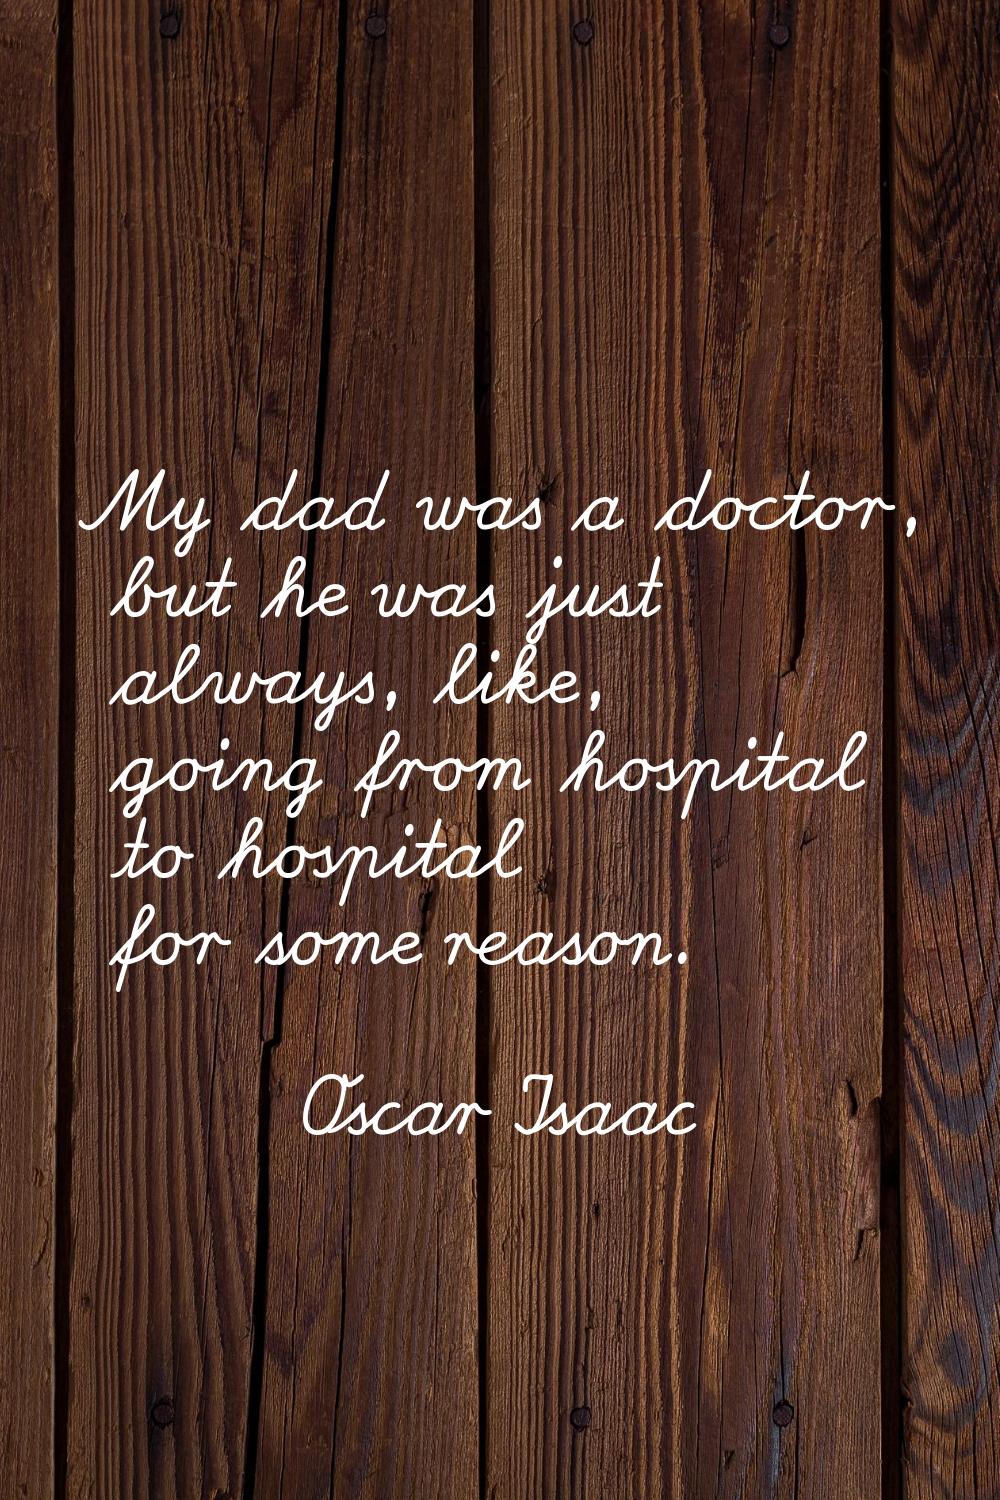 My dad was a doctor, but he was just always, like, going from hospital to hospital for some reason.